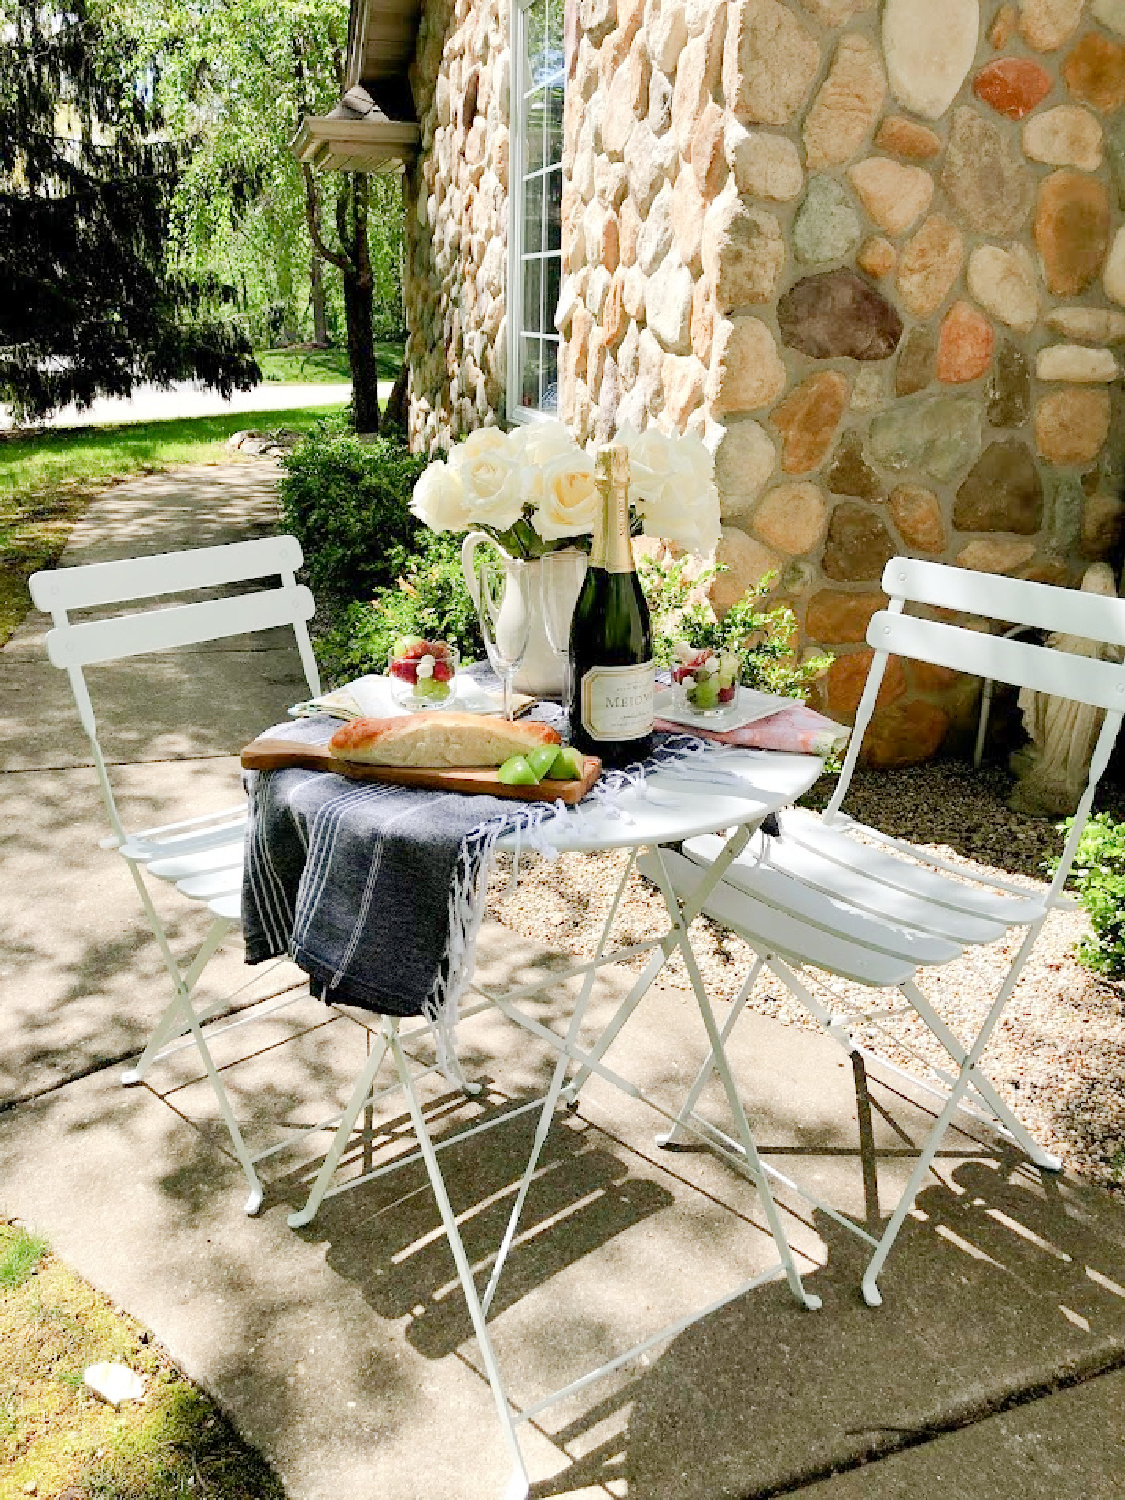 Charmingly French country and rustic casual dining outdoors with white cafe chairs - Hello Lovely Studio. #outdoordining #frenchaesthetic #countryfrench